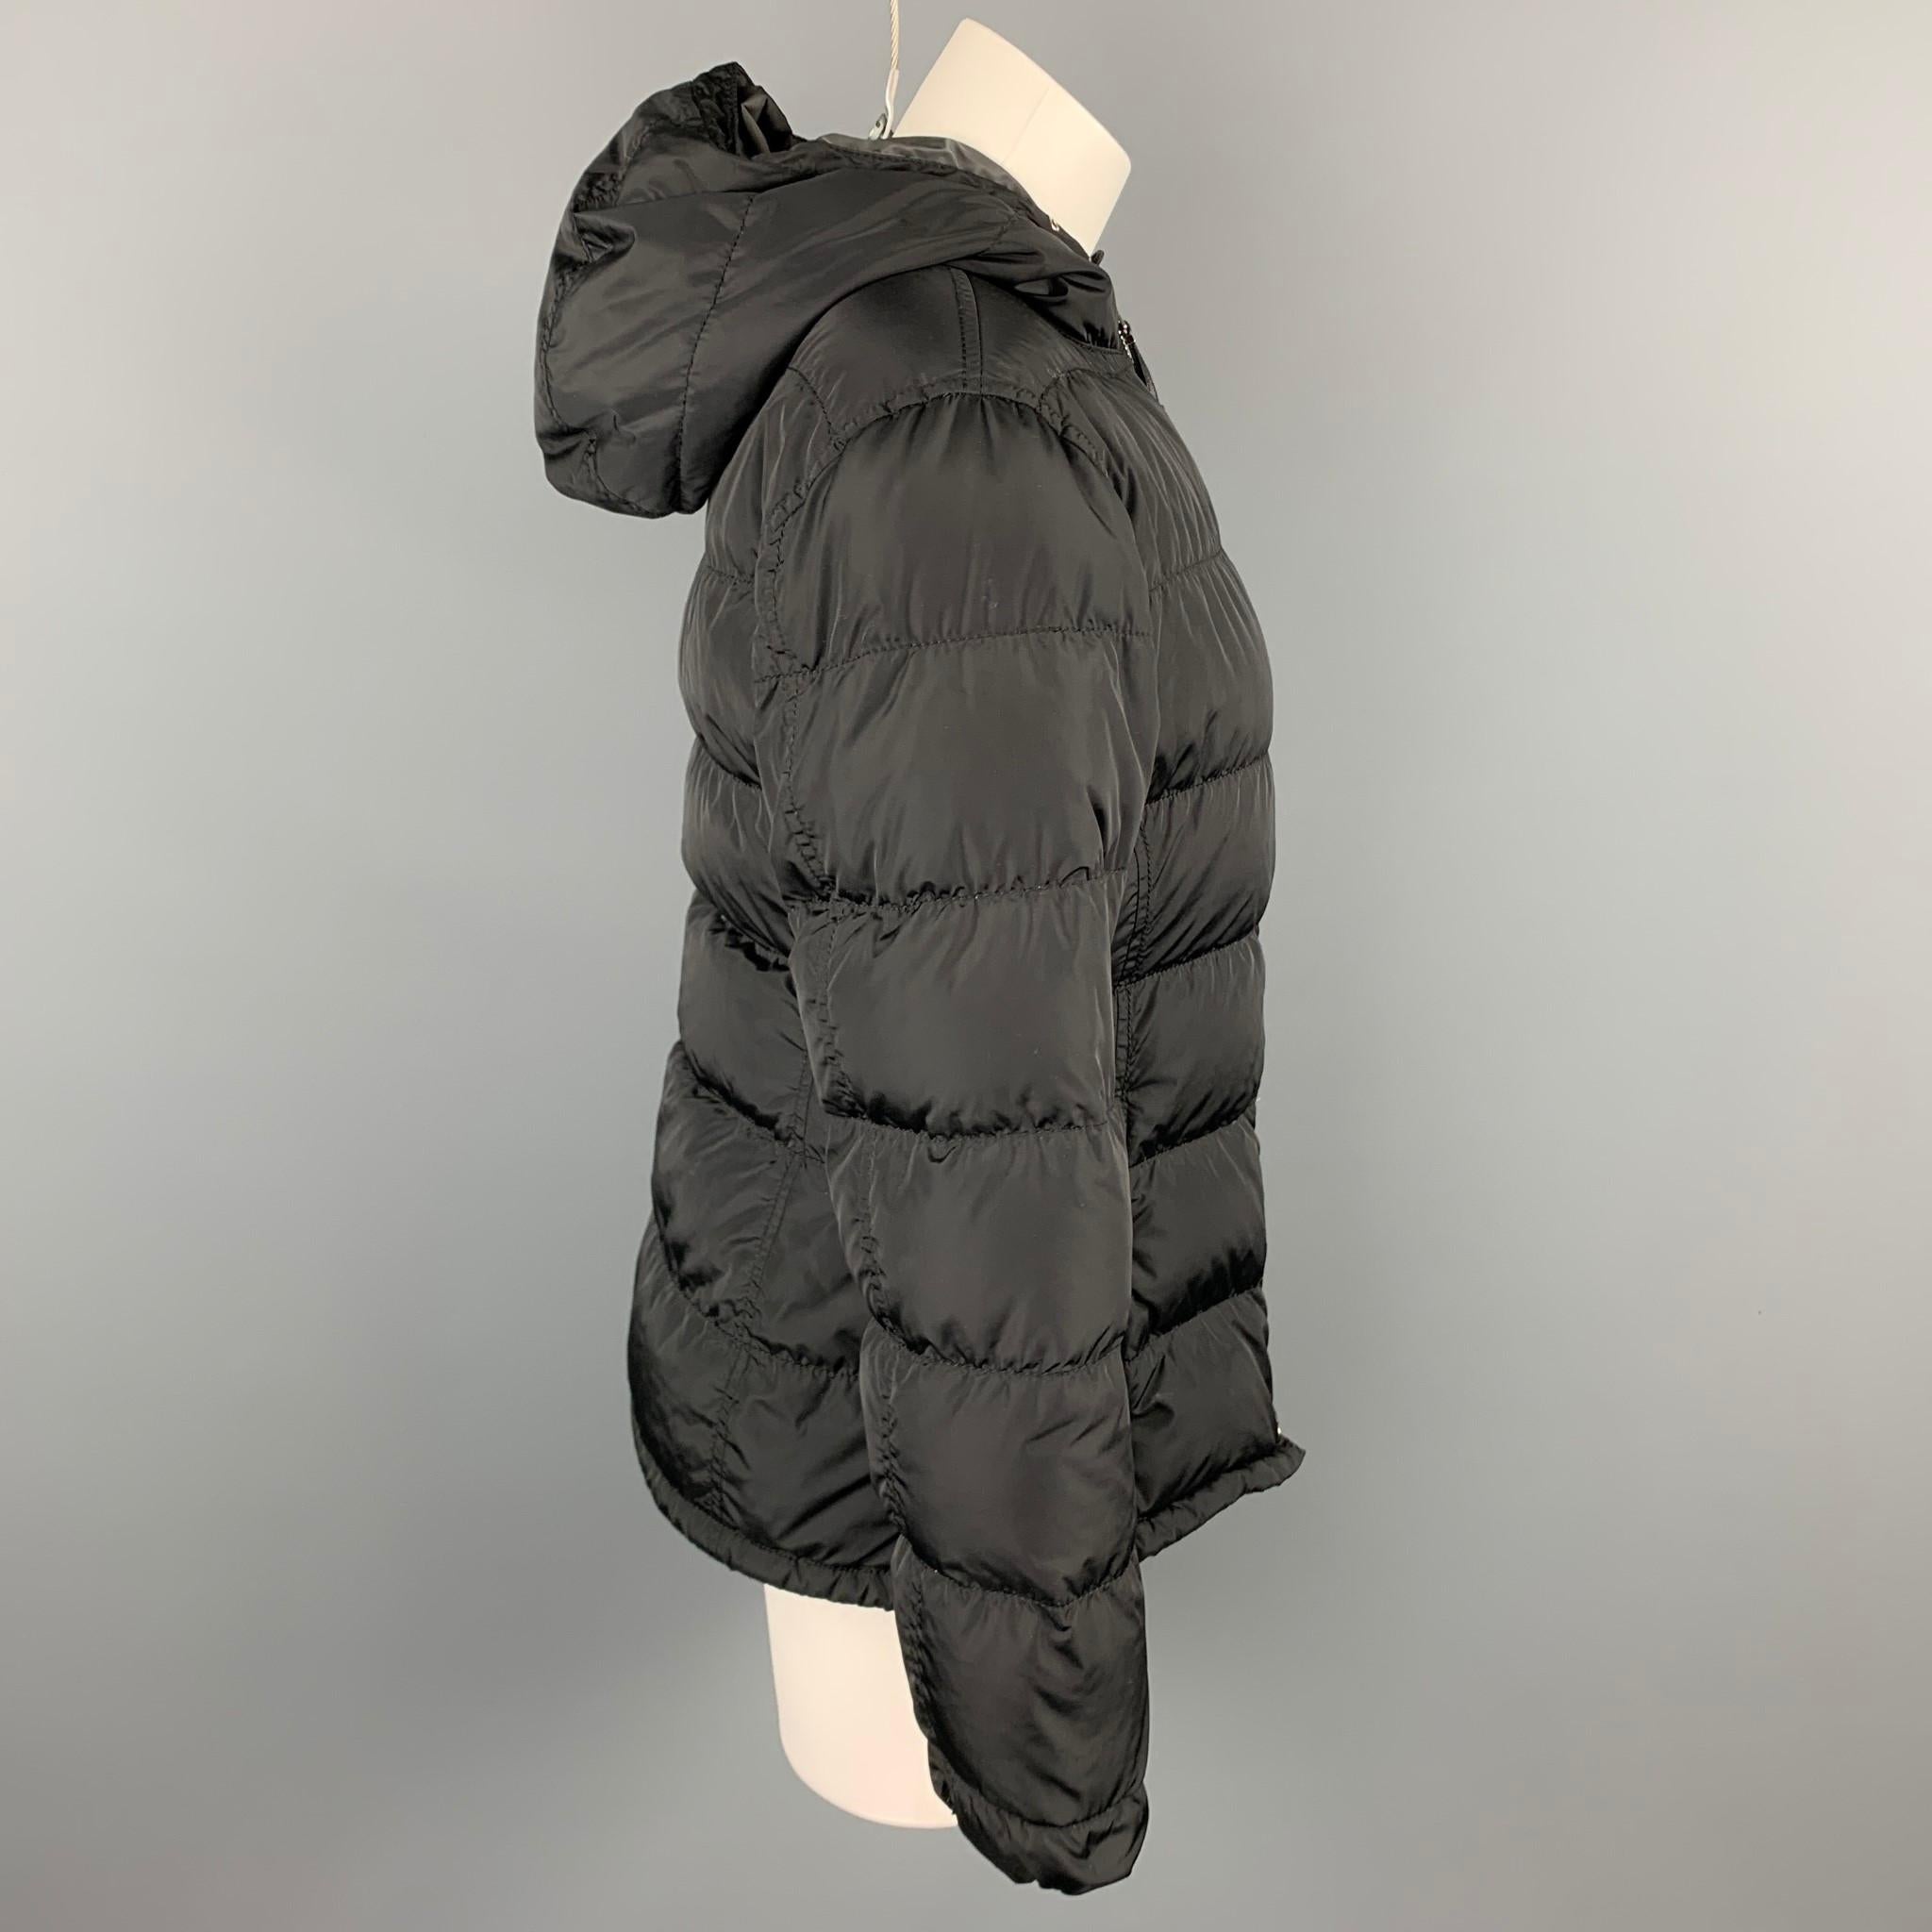 PRADA jacket comes in a black quilted nylon featuring a hooded style, zipper pockets, inner waistband, and a zip up closure. Moderate wear. Made in Italy.

Good Pre-Owned Condition.
Marked: 42

Measurements:

Shoulder: 17 in.
Bust: 38 in.
Sleeve: 24